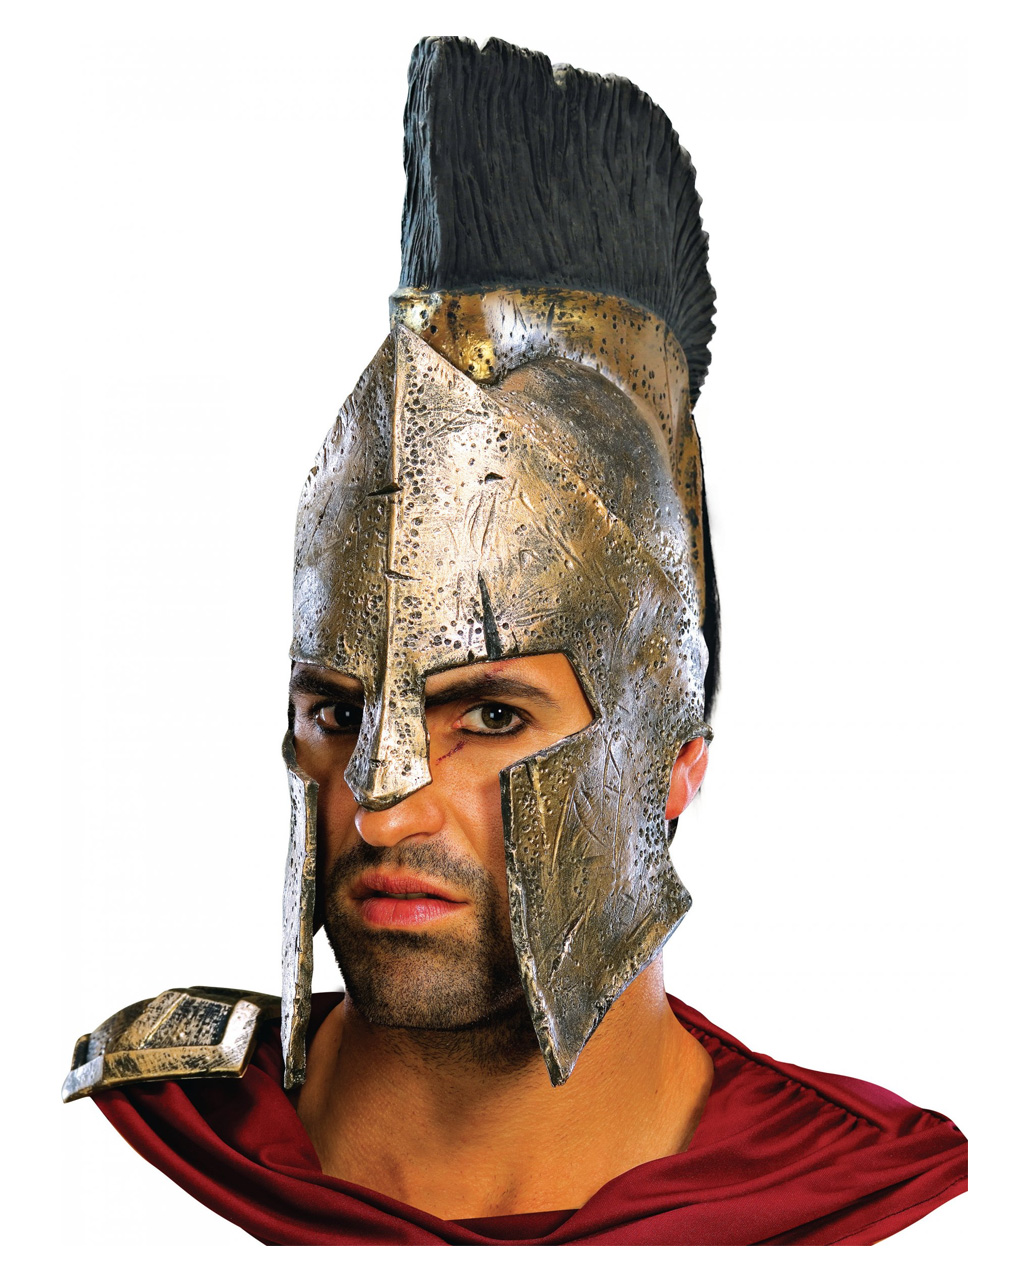 Details about  / SPARTAN Helmet Leonidas Hollywood Movie Armor Medieval With Stand HALLOWEEN